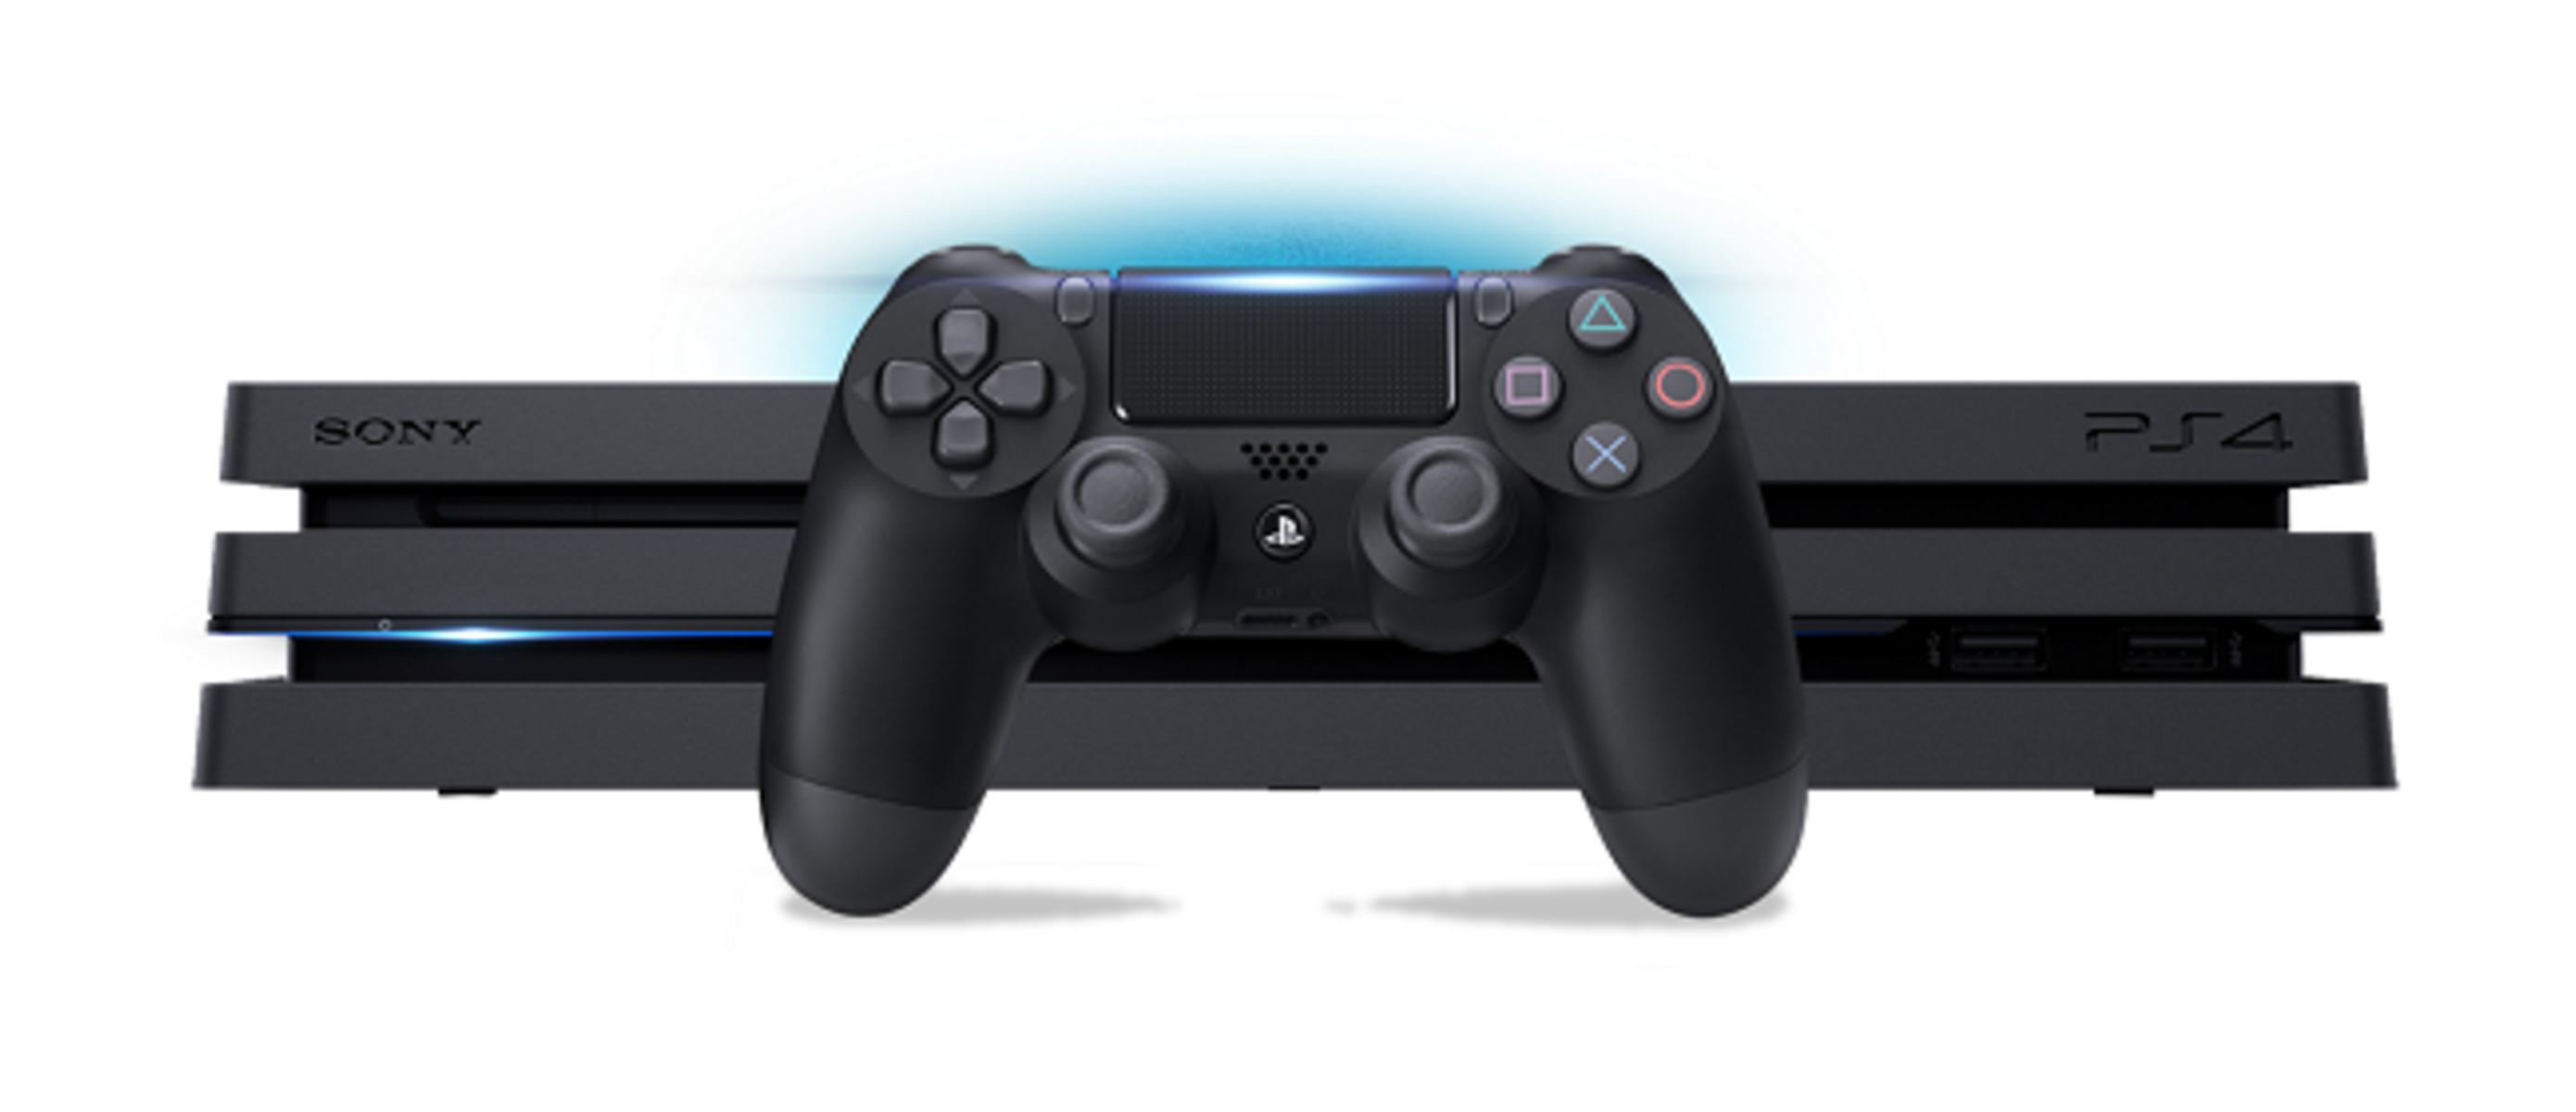 Ps4 типы. Console PLAYSTATION ps4. Ps4 Pro 500gb. PLAYSTATION 4 Pro 1tb. Приставка Sony PLAYSTATION 5 PNG.